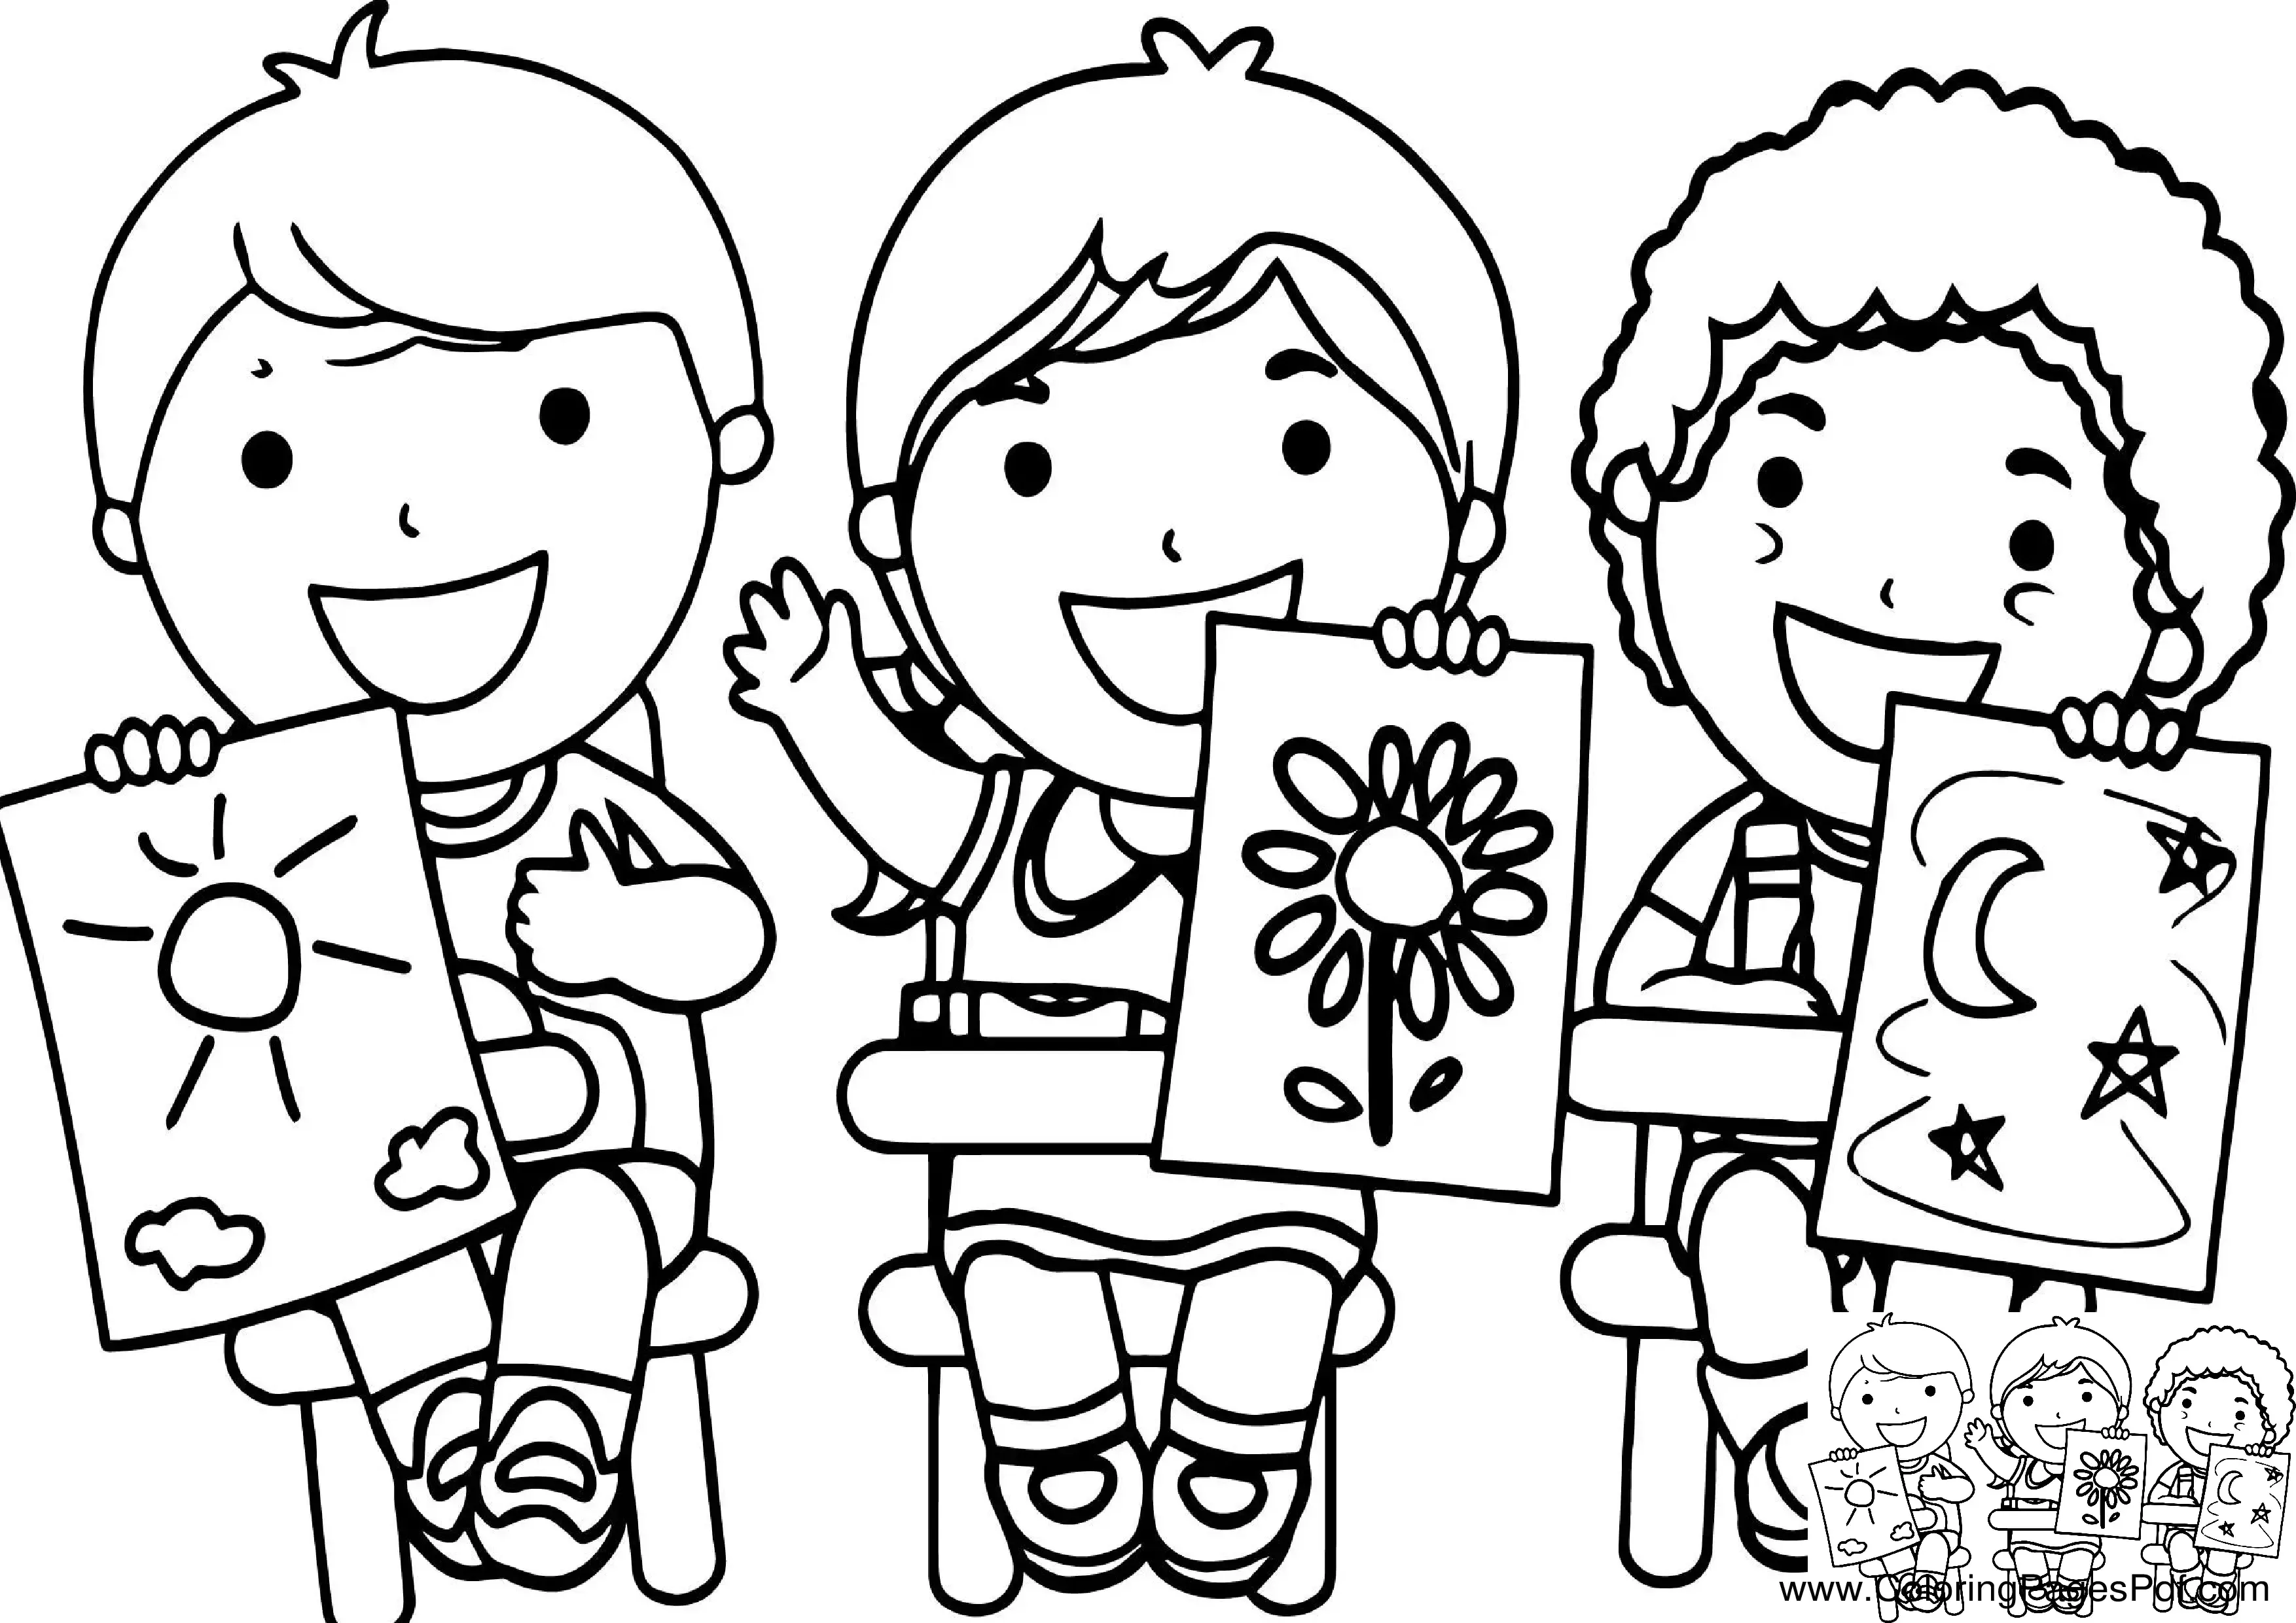 Kids coloring pages pdf